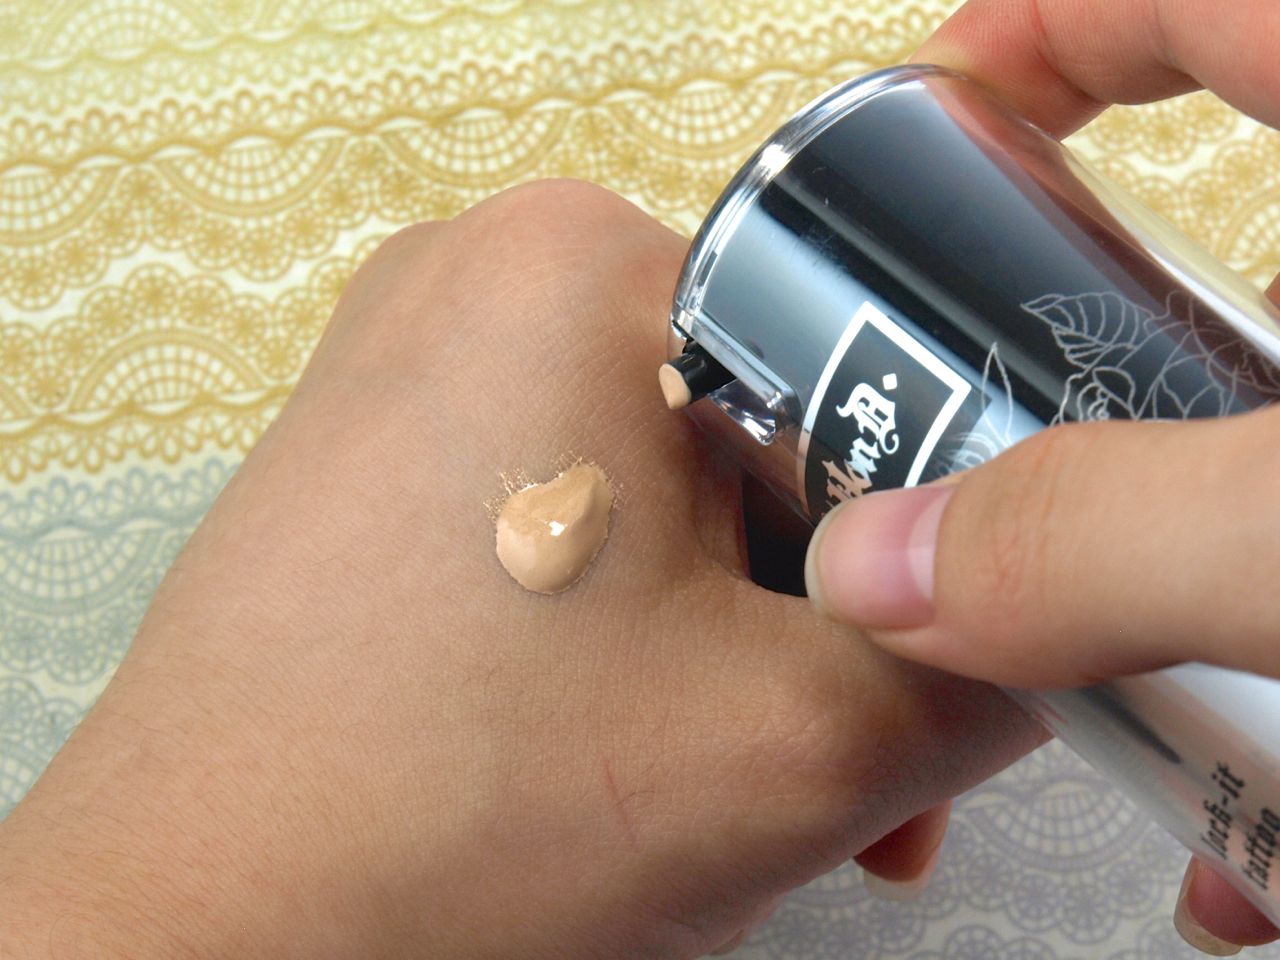 Kat Von D Lock-It Tattoo Foundation in "Light 45": Review and Swatches